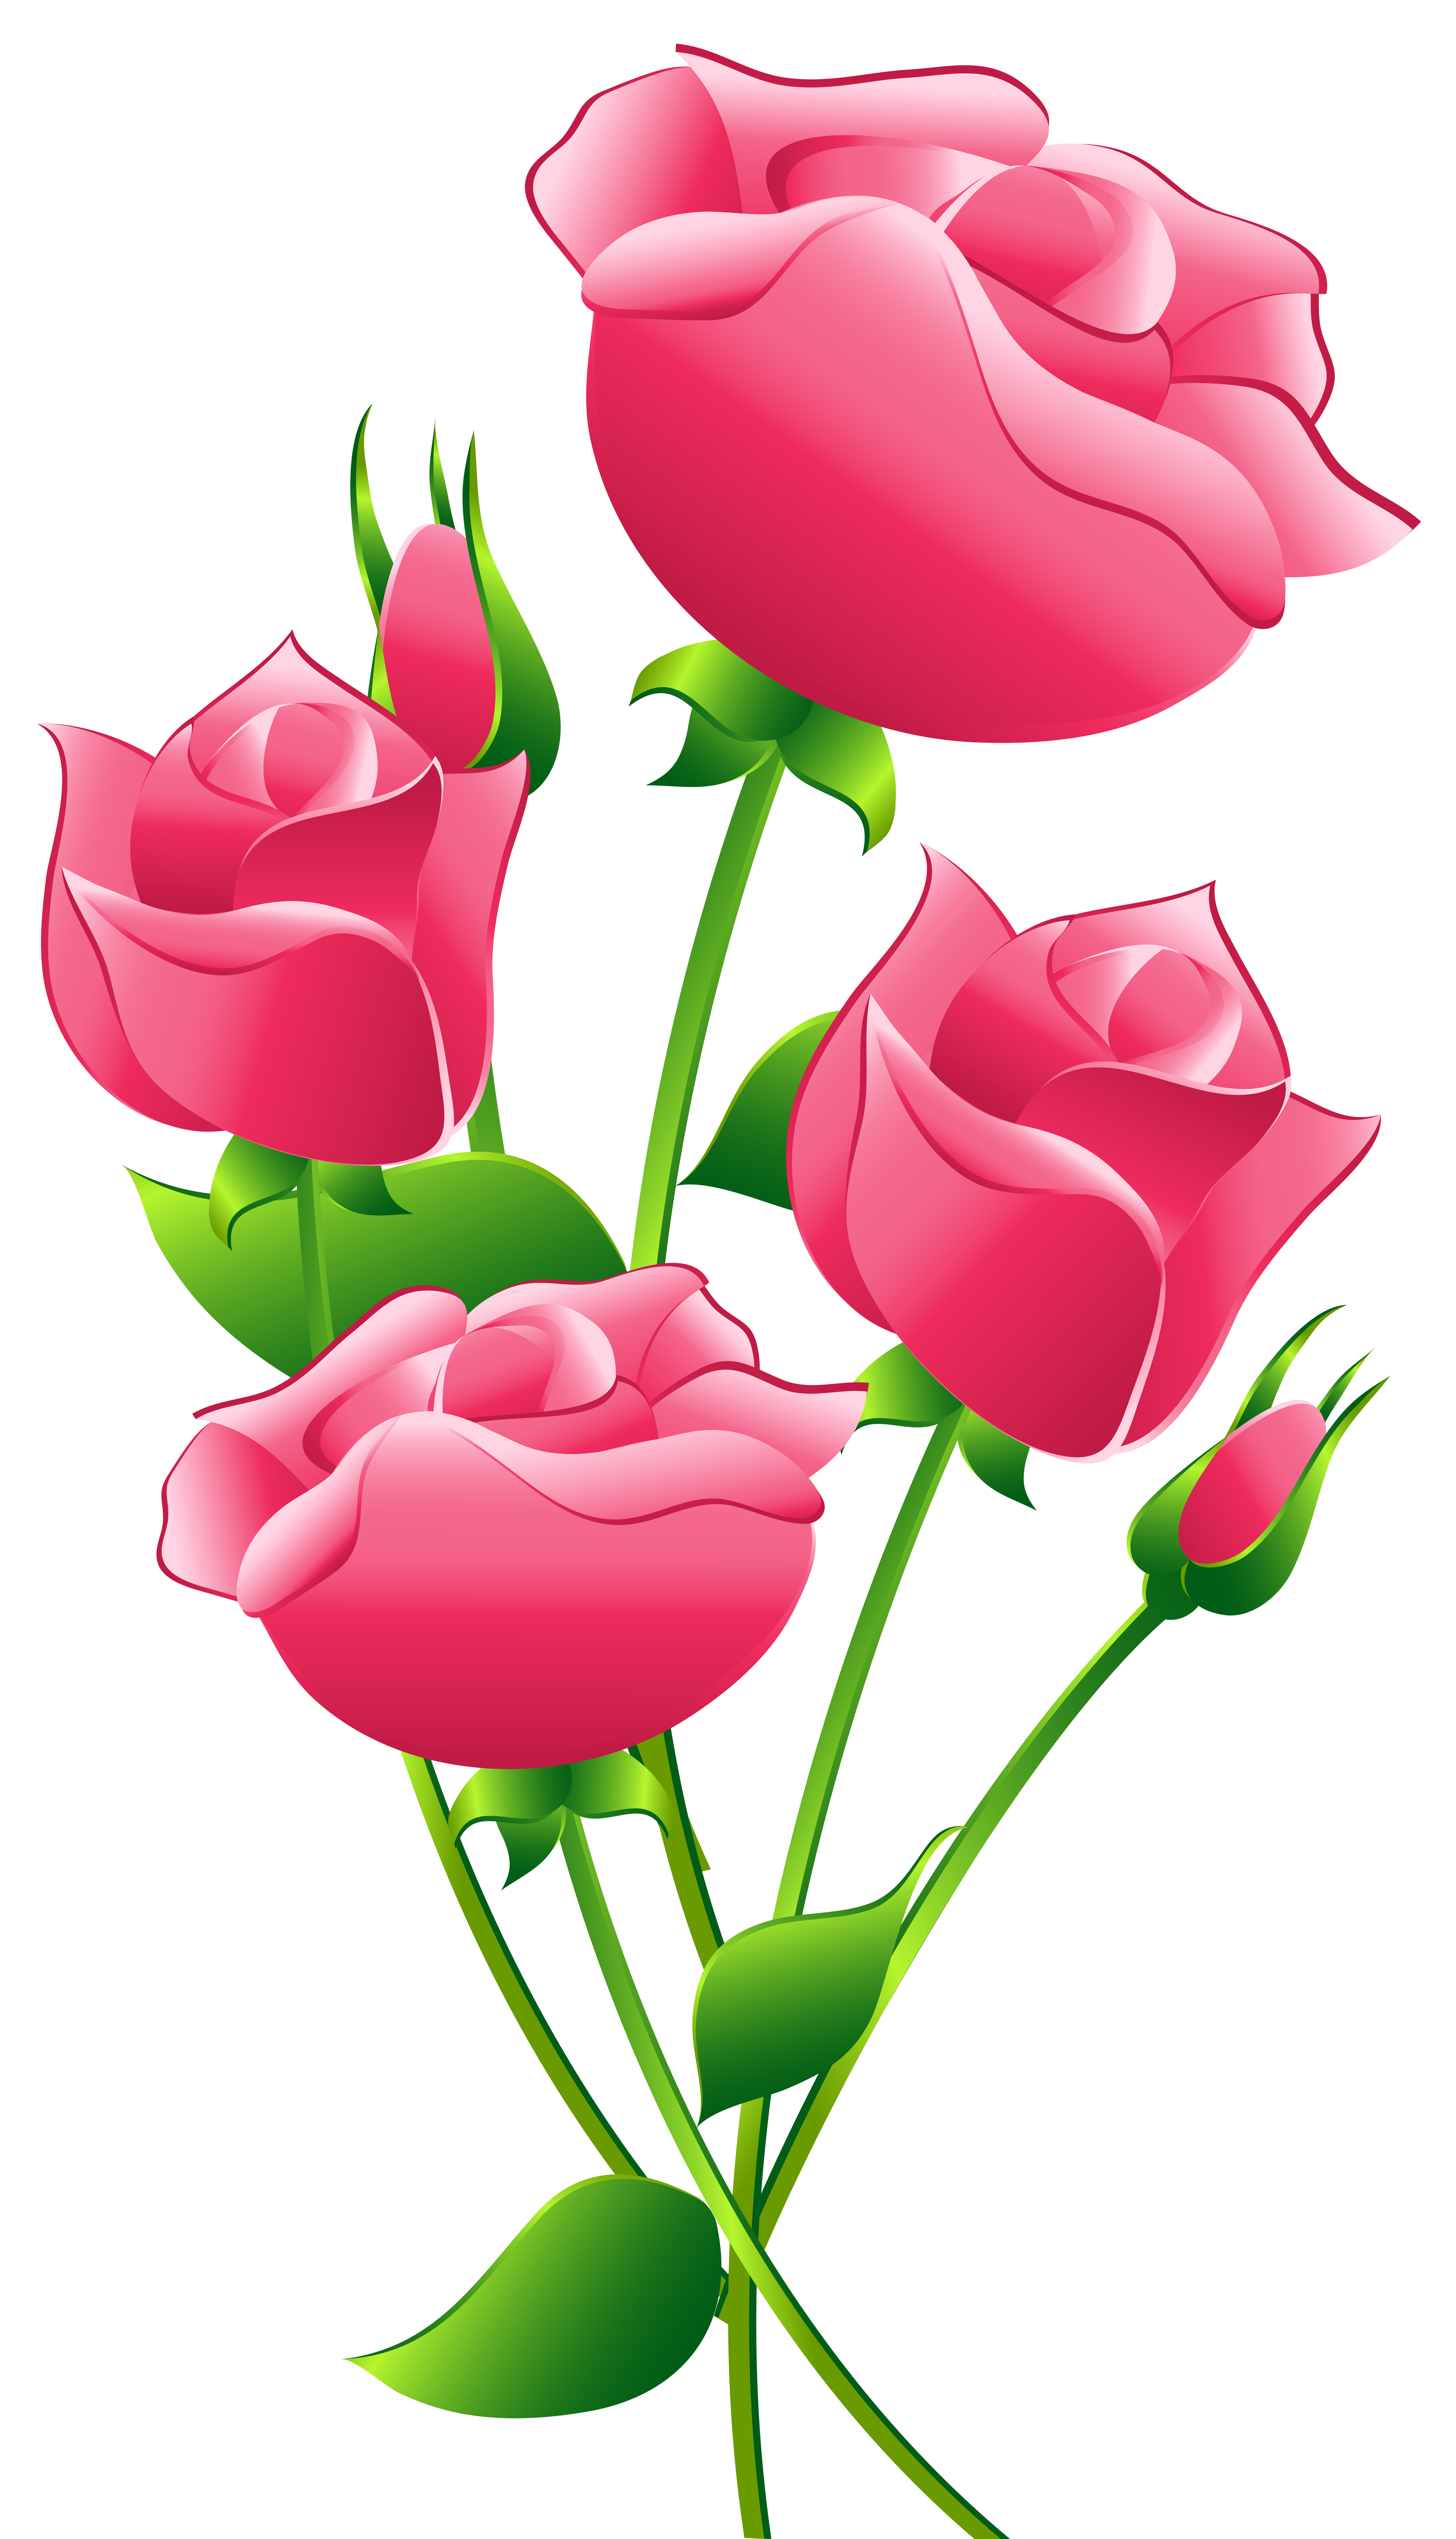 Roses clipart free rose images and clip art - Clipartix